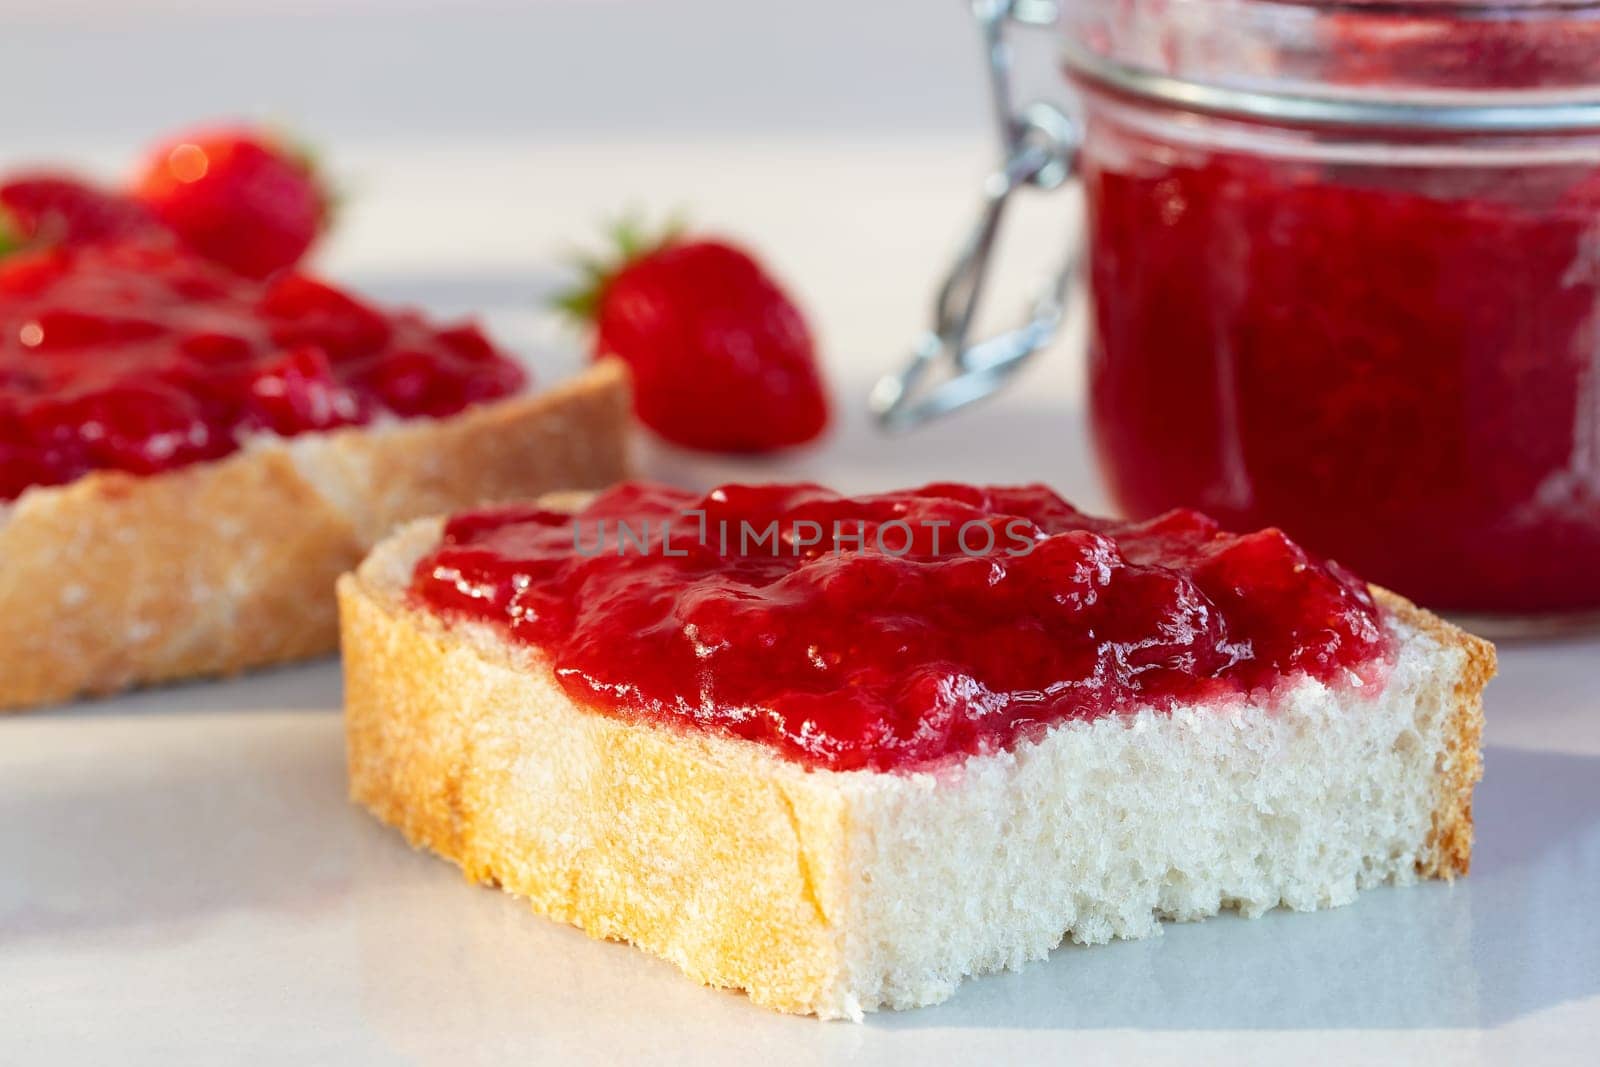 Wheat bread toasts with spread strawberry jam on the table by galsand